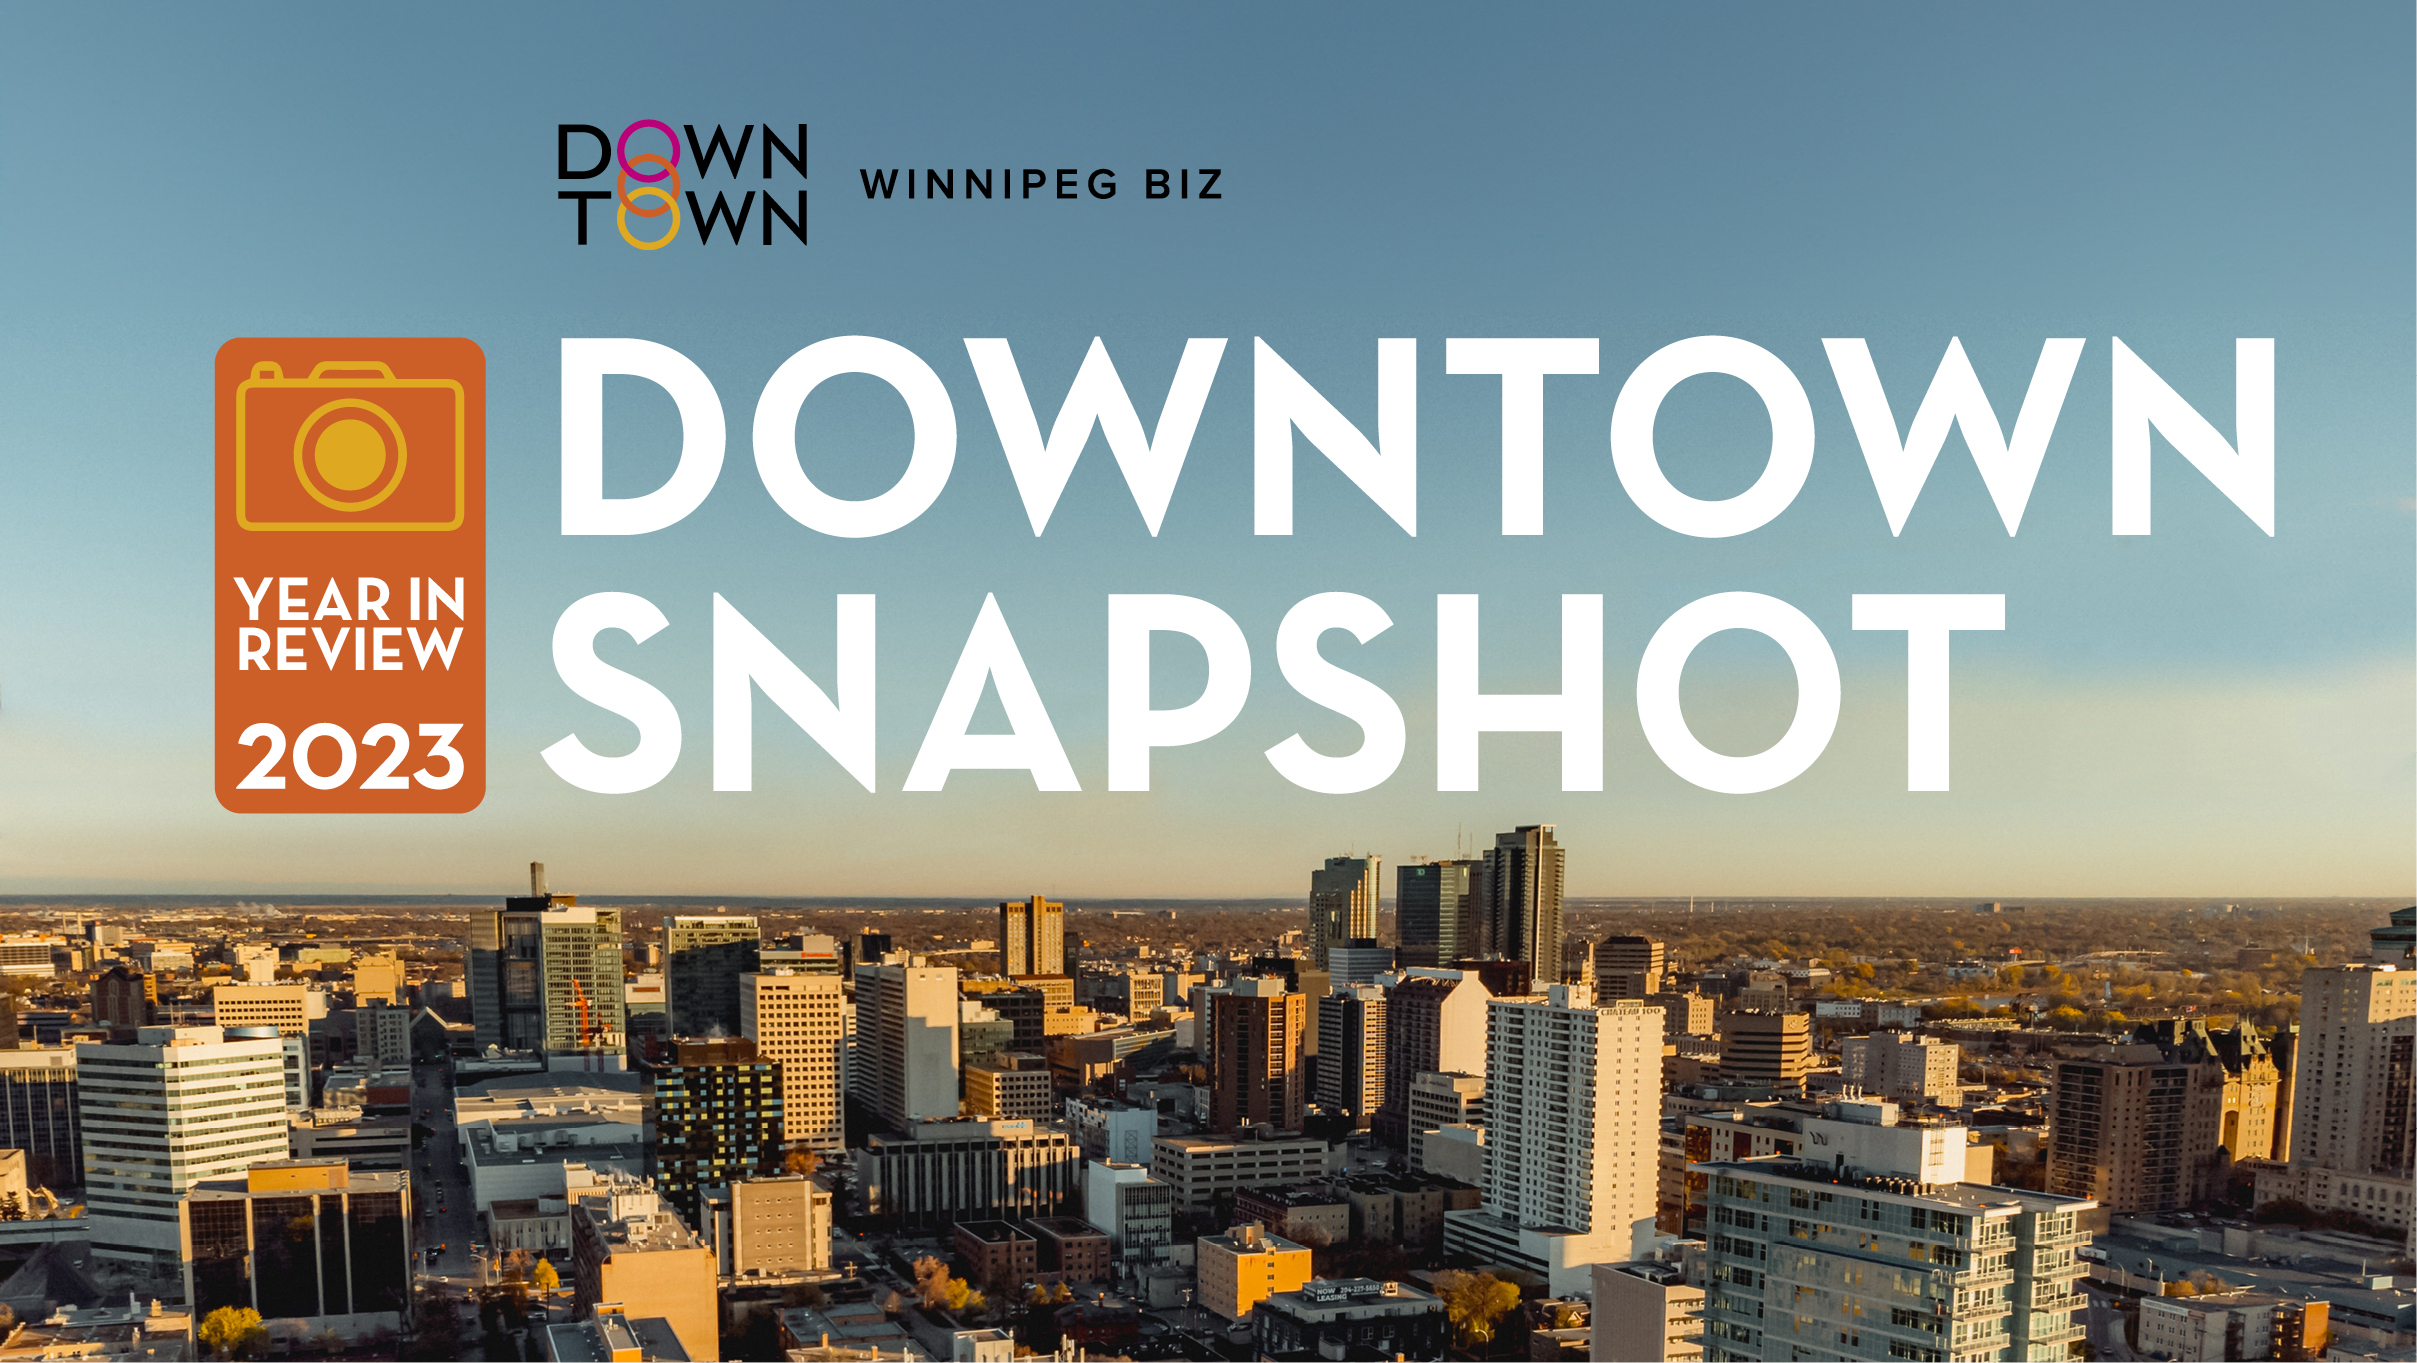 New report highlights rising visitation, residents and investment in downtown Winnipeg